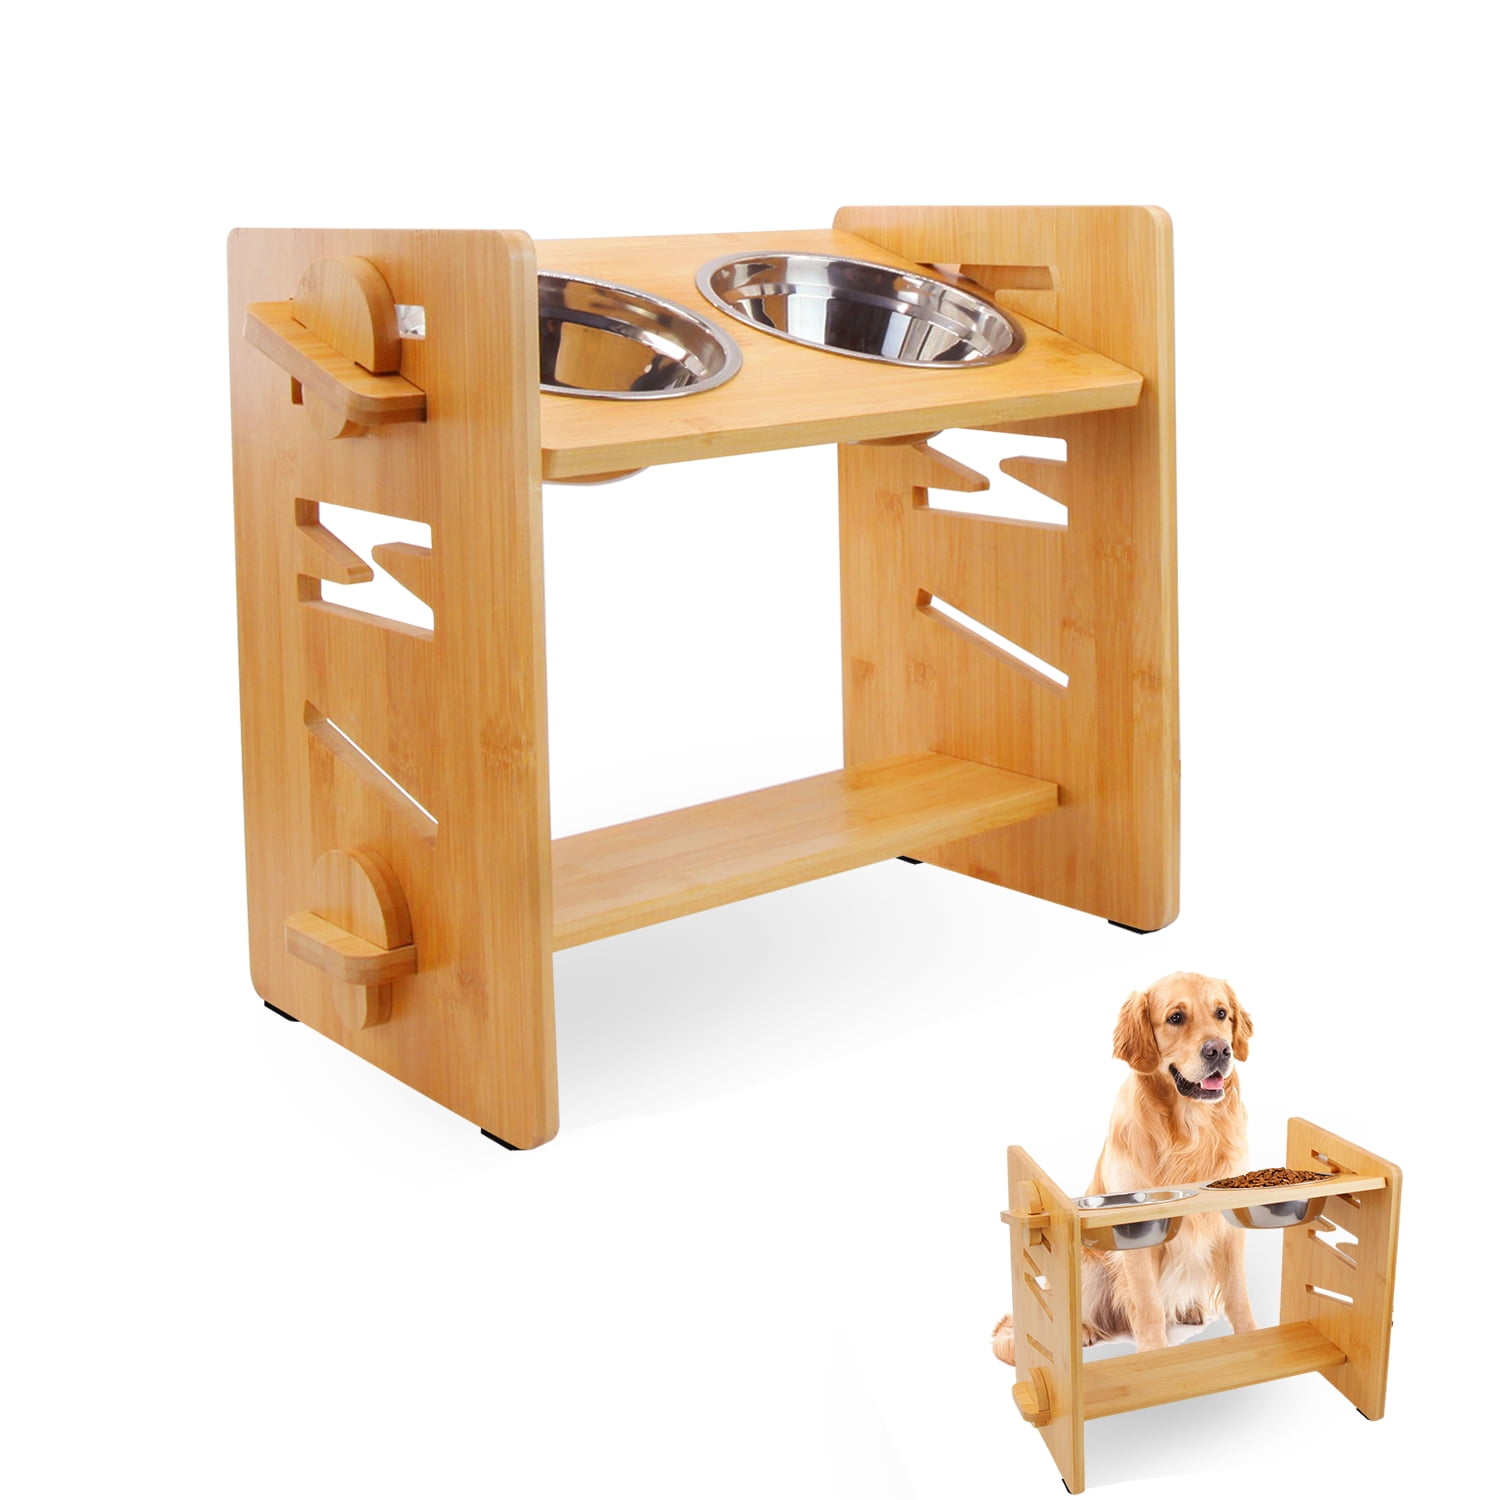 Dropship Bamboo Double Dog Raised Bowls 15 Degree Tilt Elevated Dog Bowls  With 4 Adjustable Heights 2 Stainless Steel Bowls Pet Feeder For Dogs Cats  Rabbits to Sell Online at a Lower Price